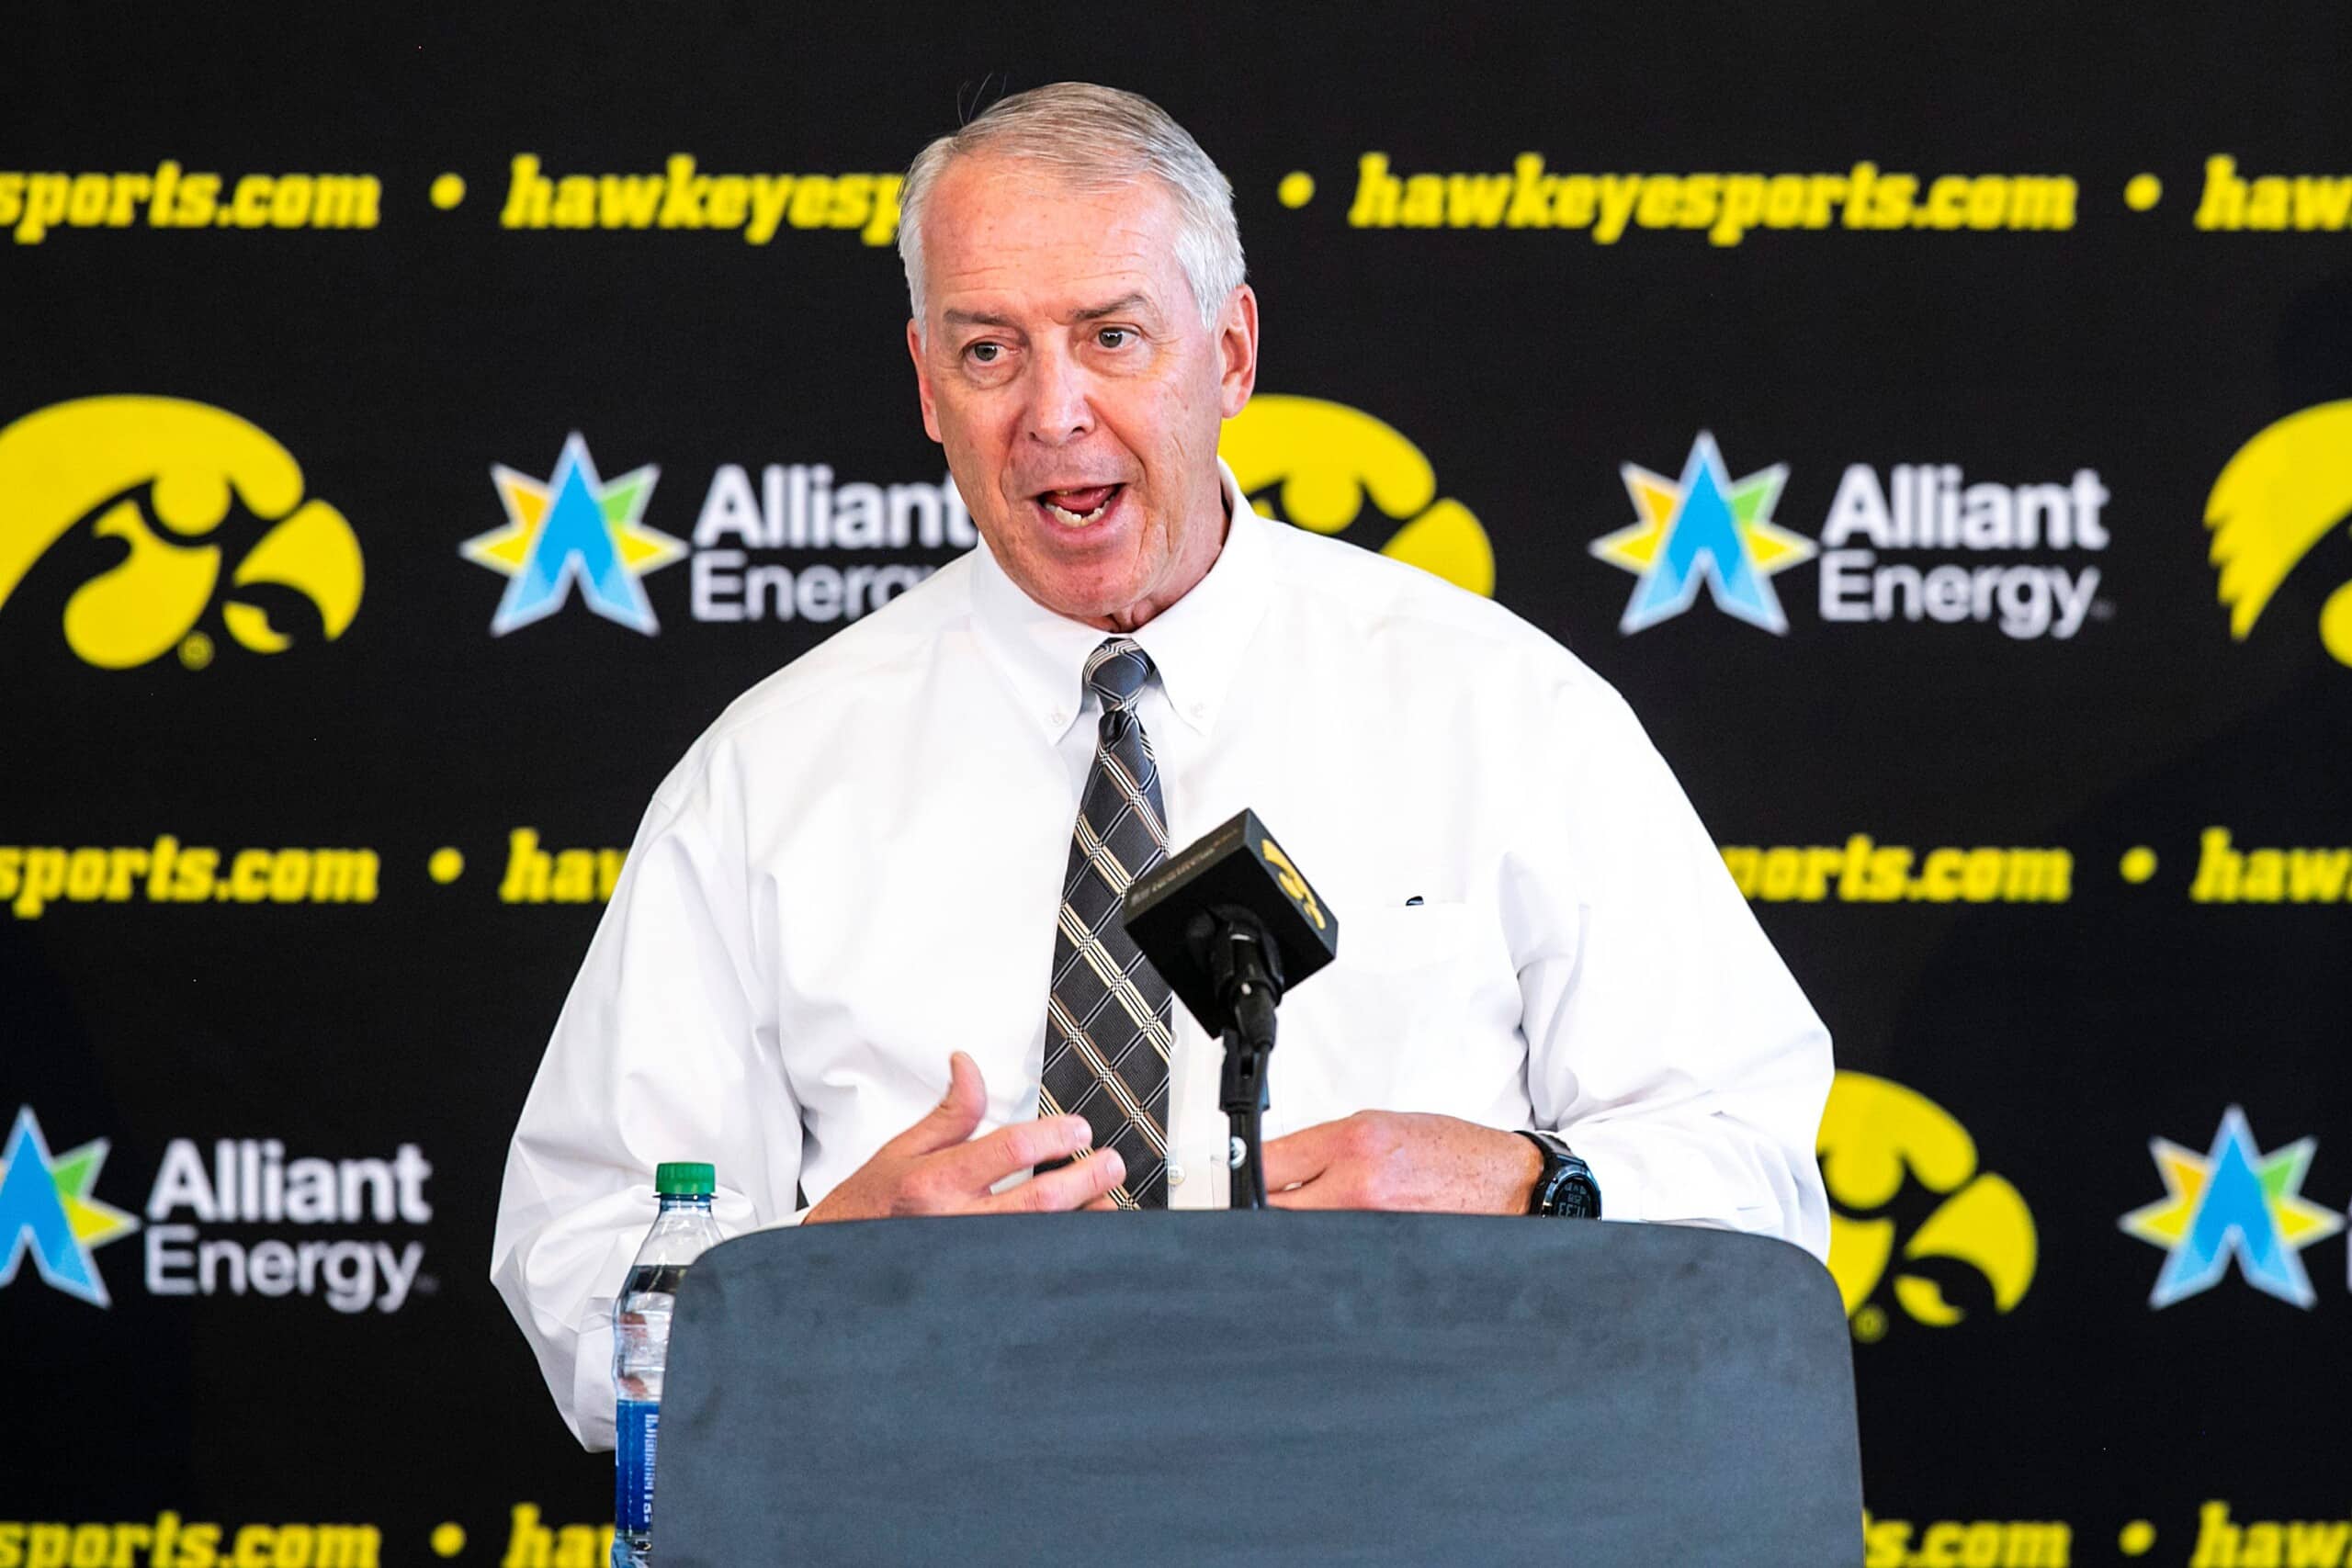 Iowa athletic director Gary Barta speaks during a news conference announcing a NCAA college women's wrestling program for the Iowa Hawkeyes, Thursday, Sept. 23, 2021, at Carver-Hawkeye Arena in Iowa City, Iowa.